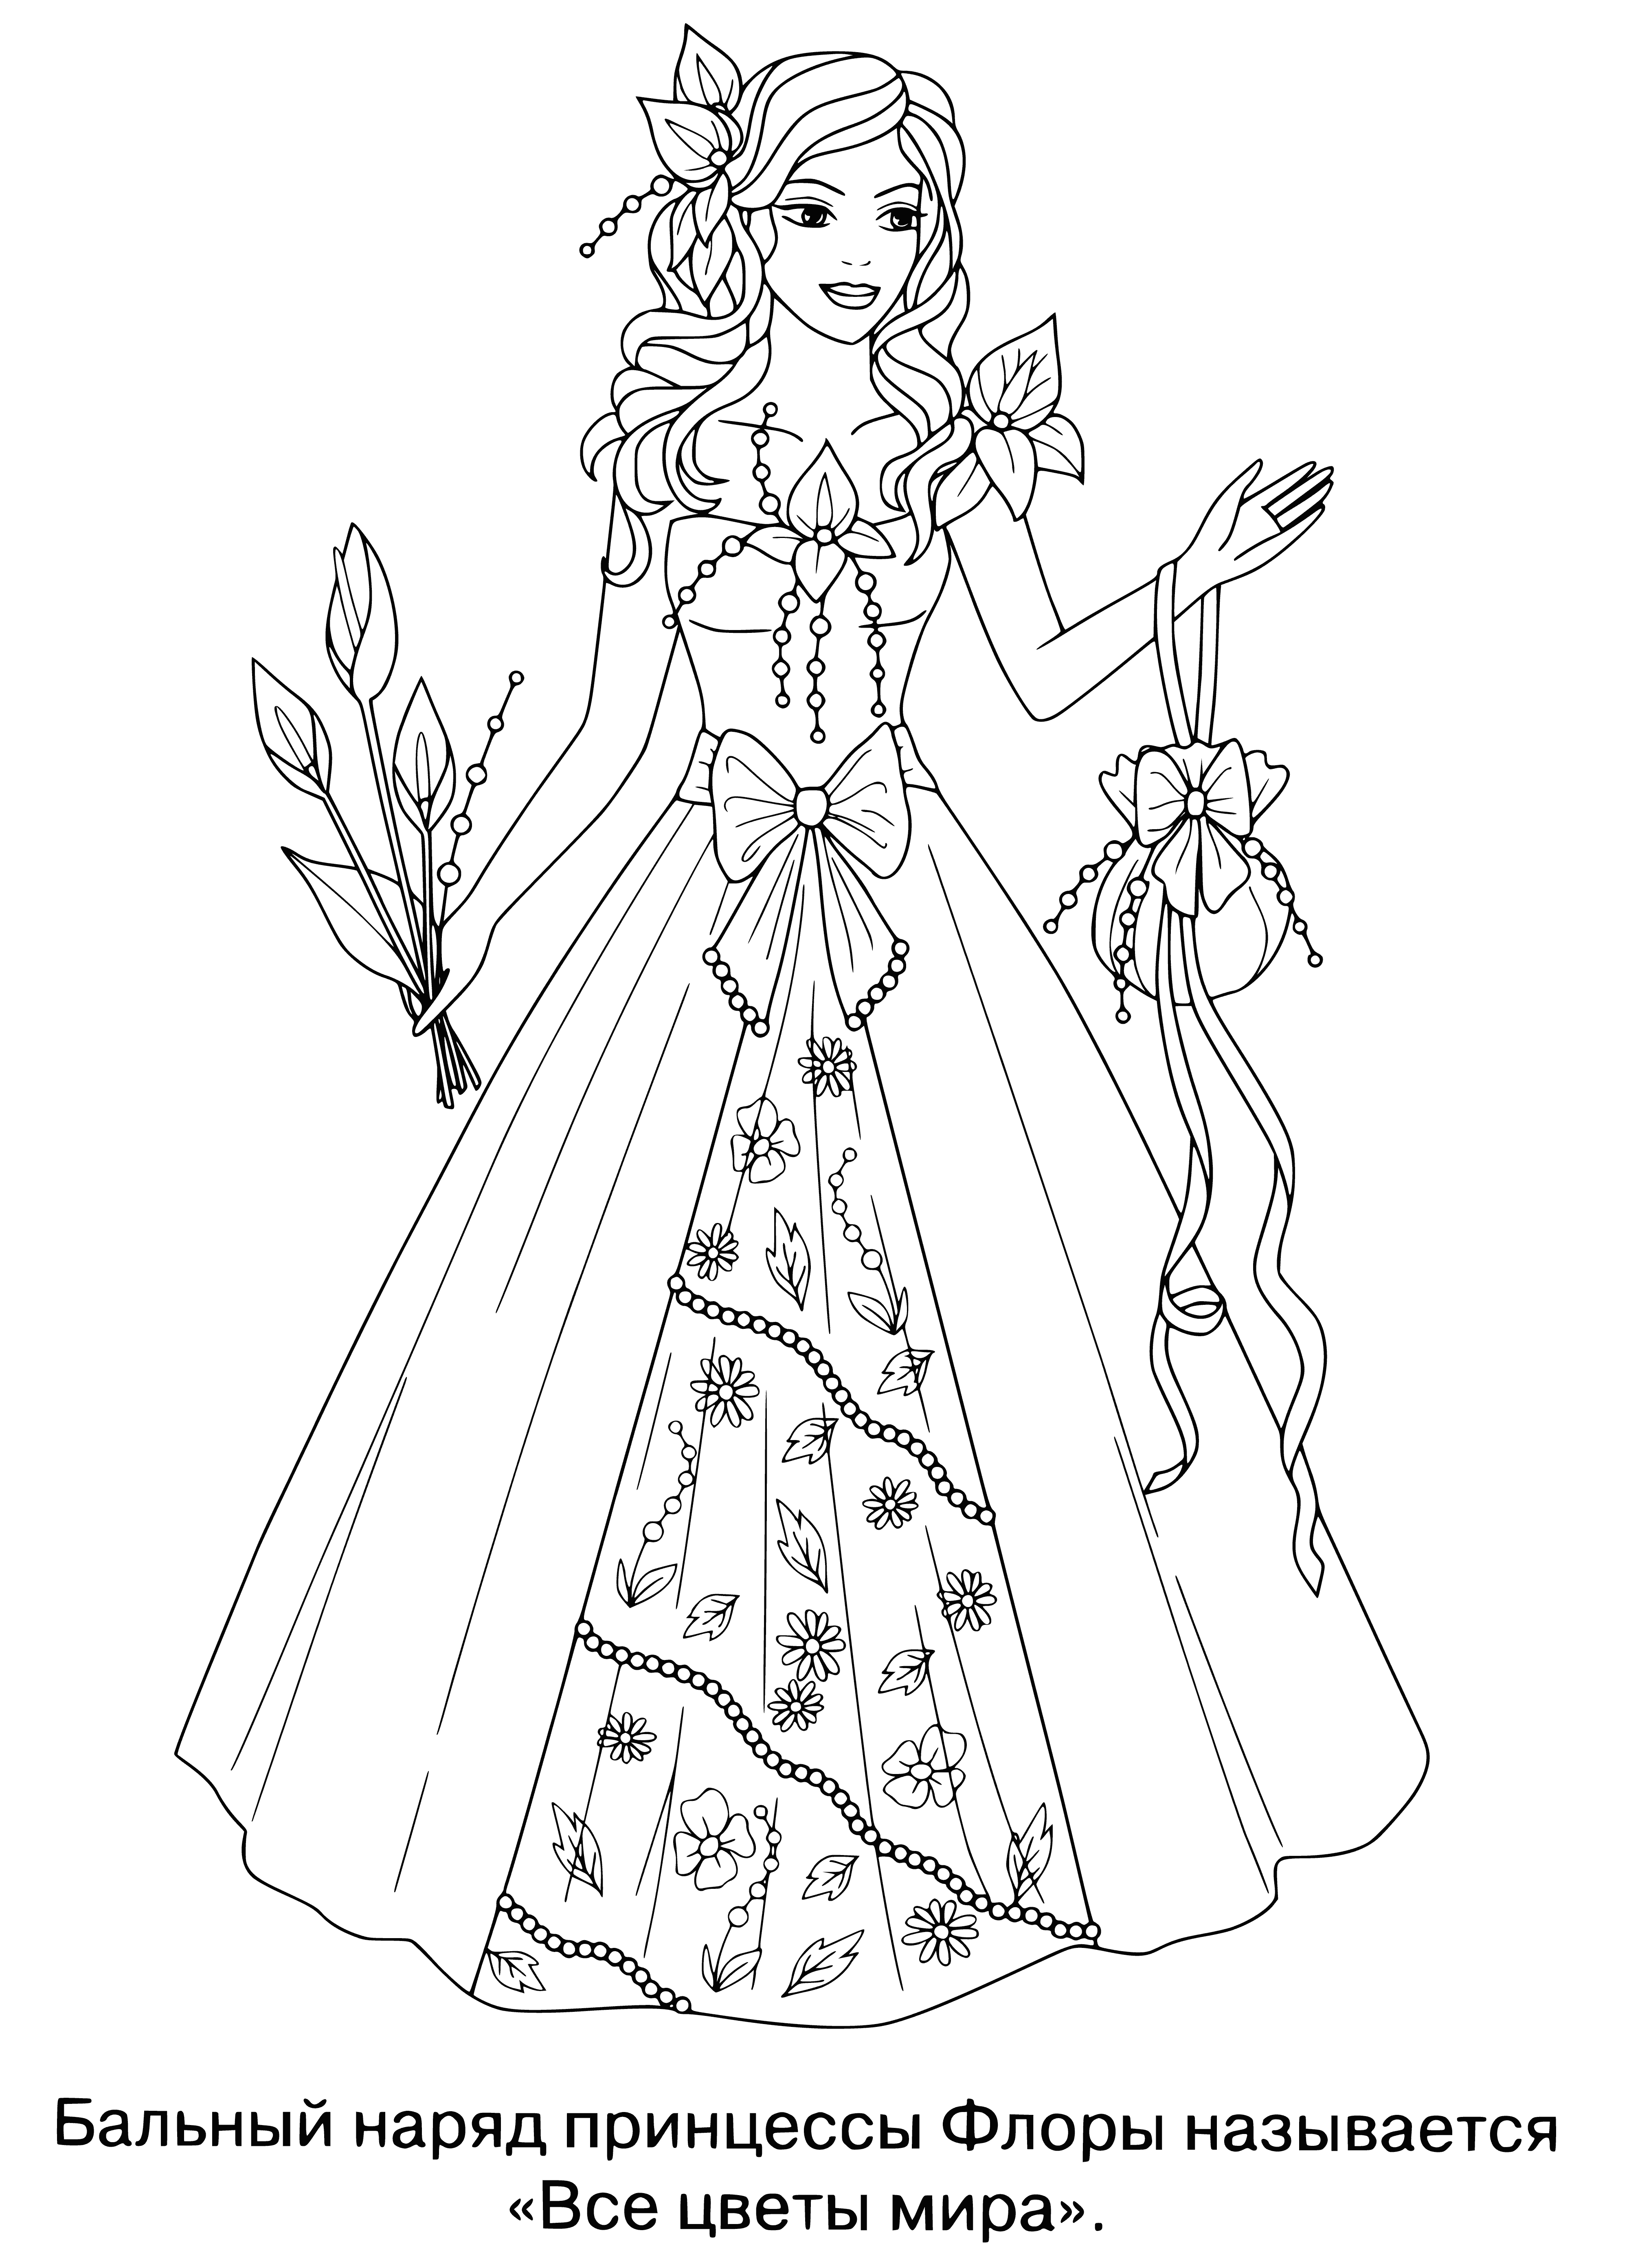 coloring page: Princess with long blonde hair wearing a tiara & pink dress stands in a flowery garden.